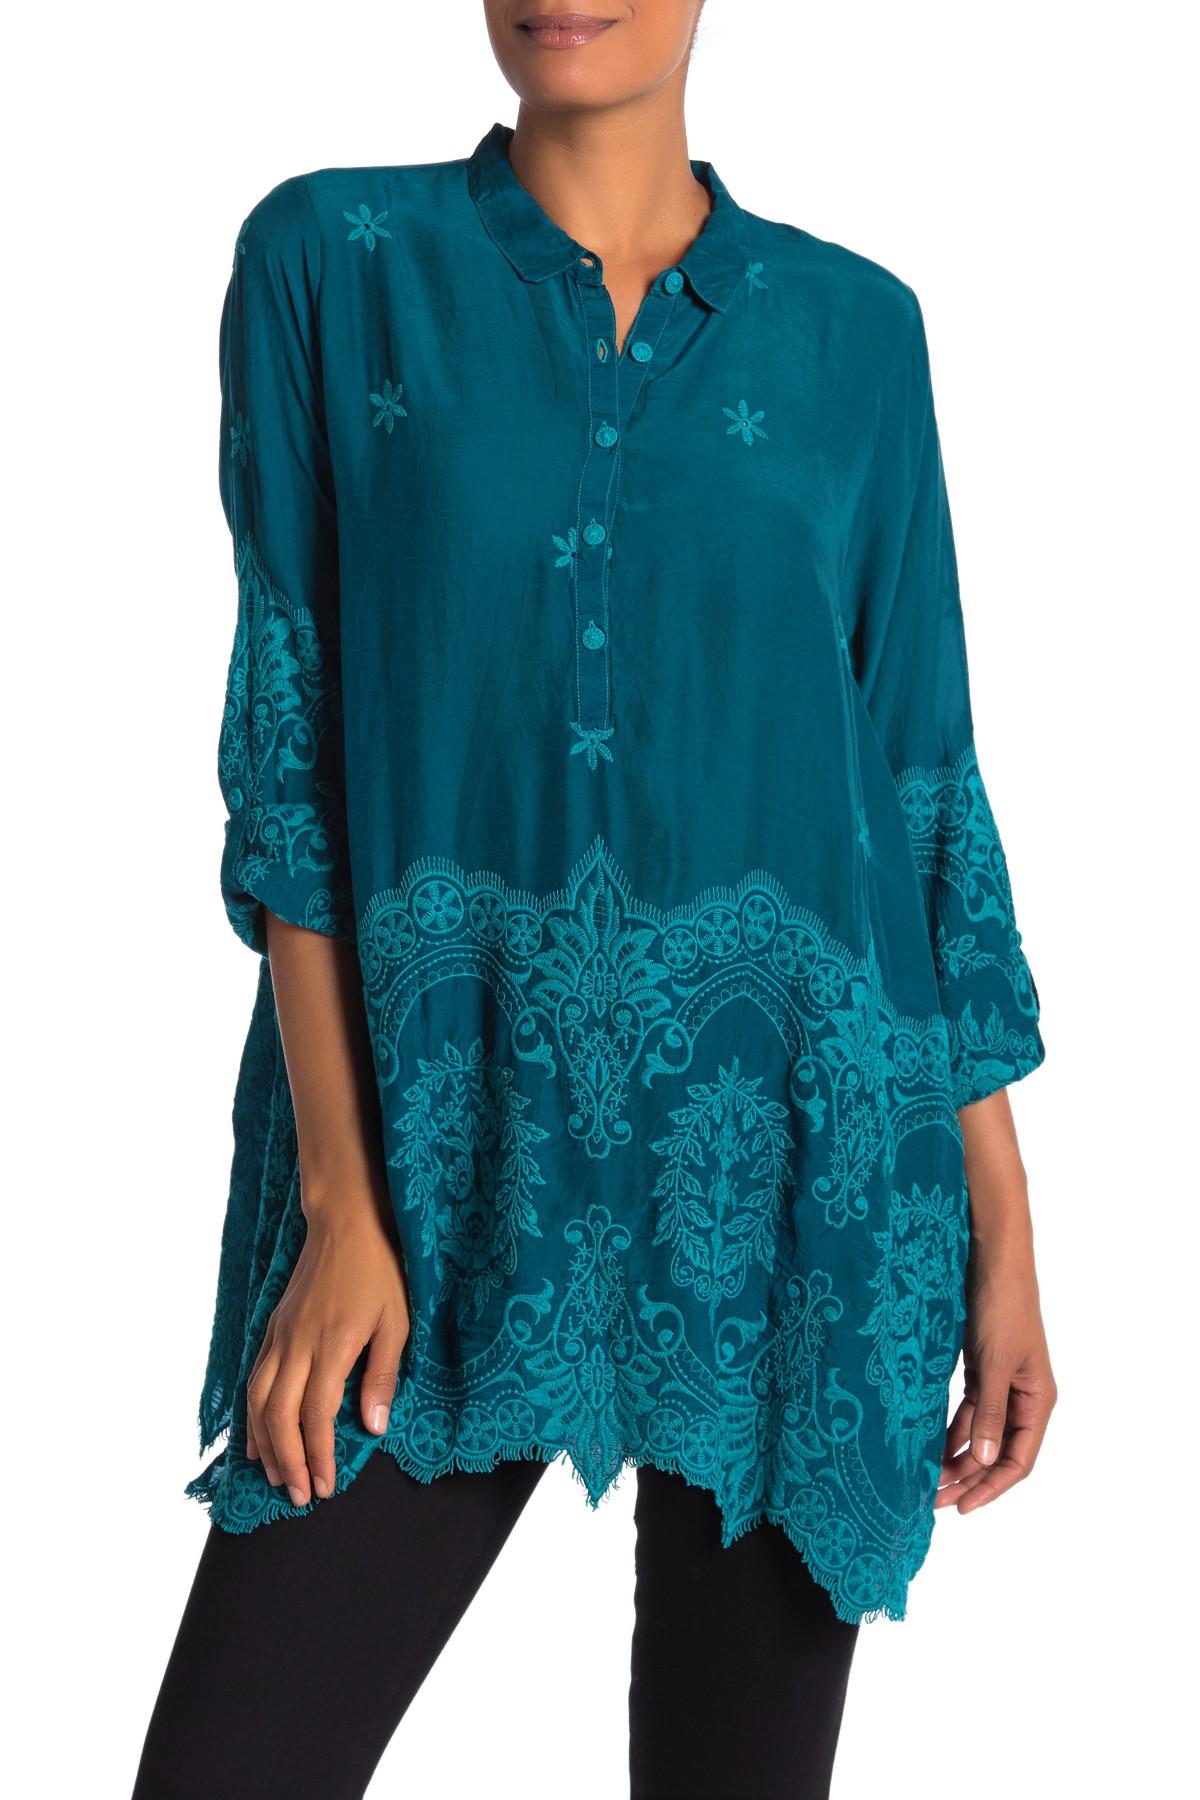 Johnny Was Love Tonal Embroidered Tunic in Blue - Lyst